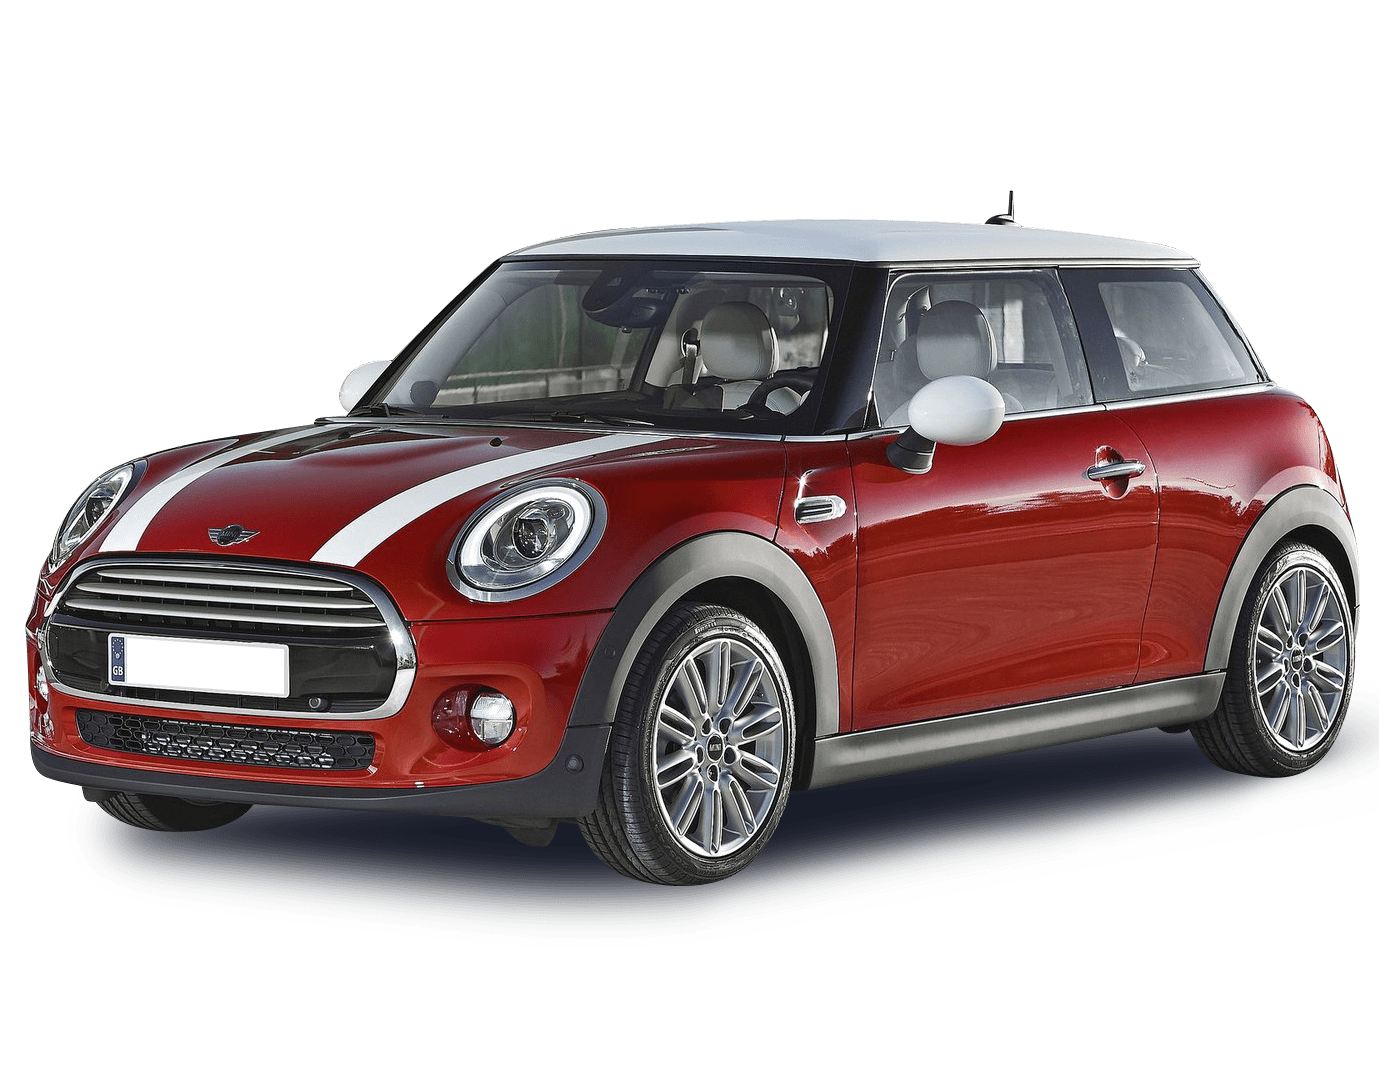 Mini Cooper Review, For Sale, Colours, Interior & Models in